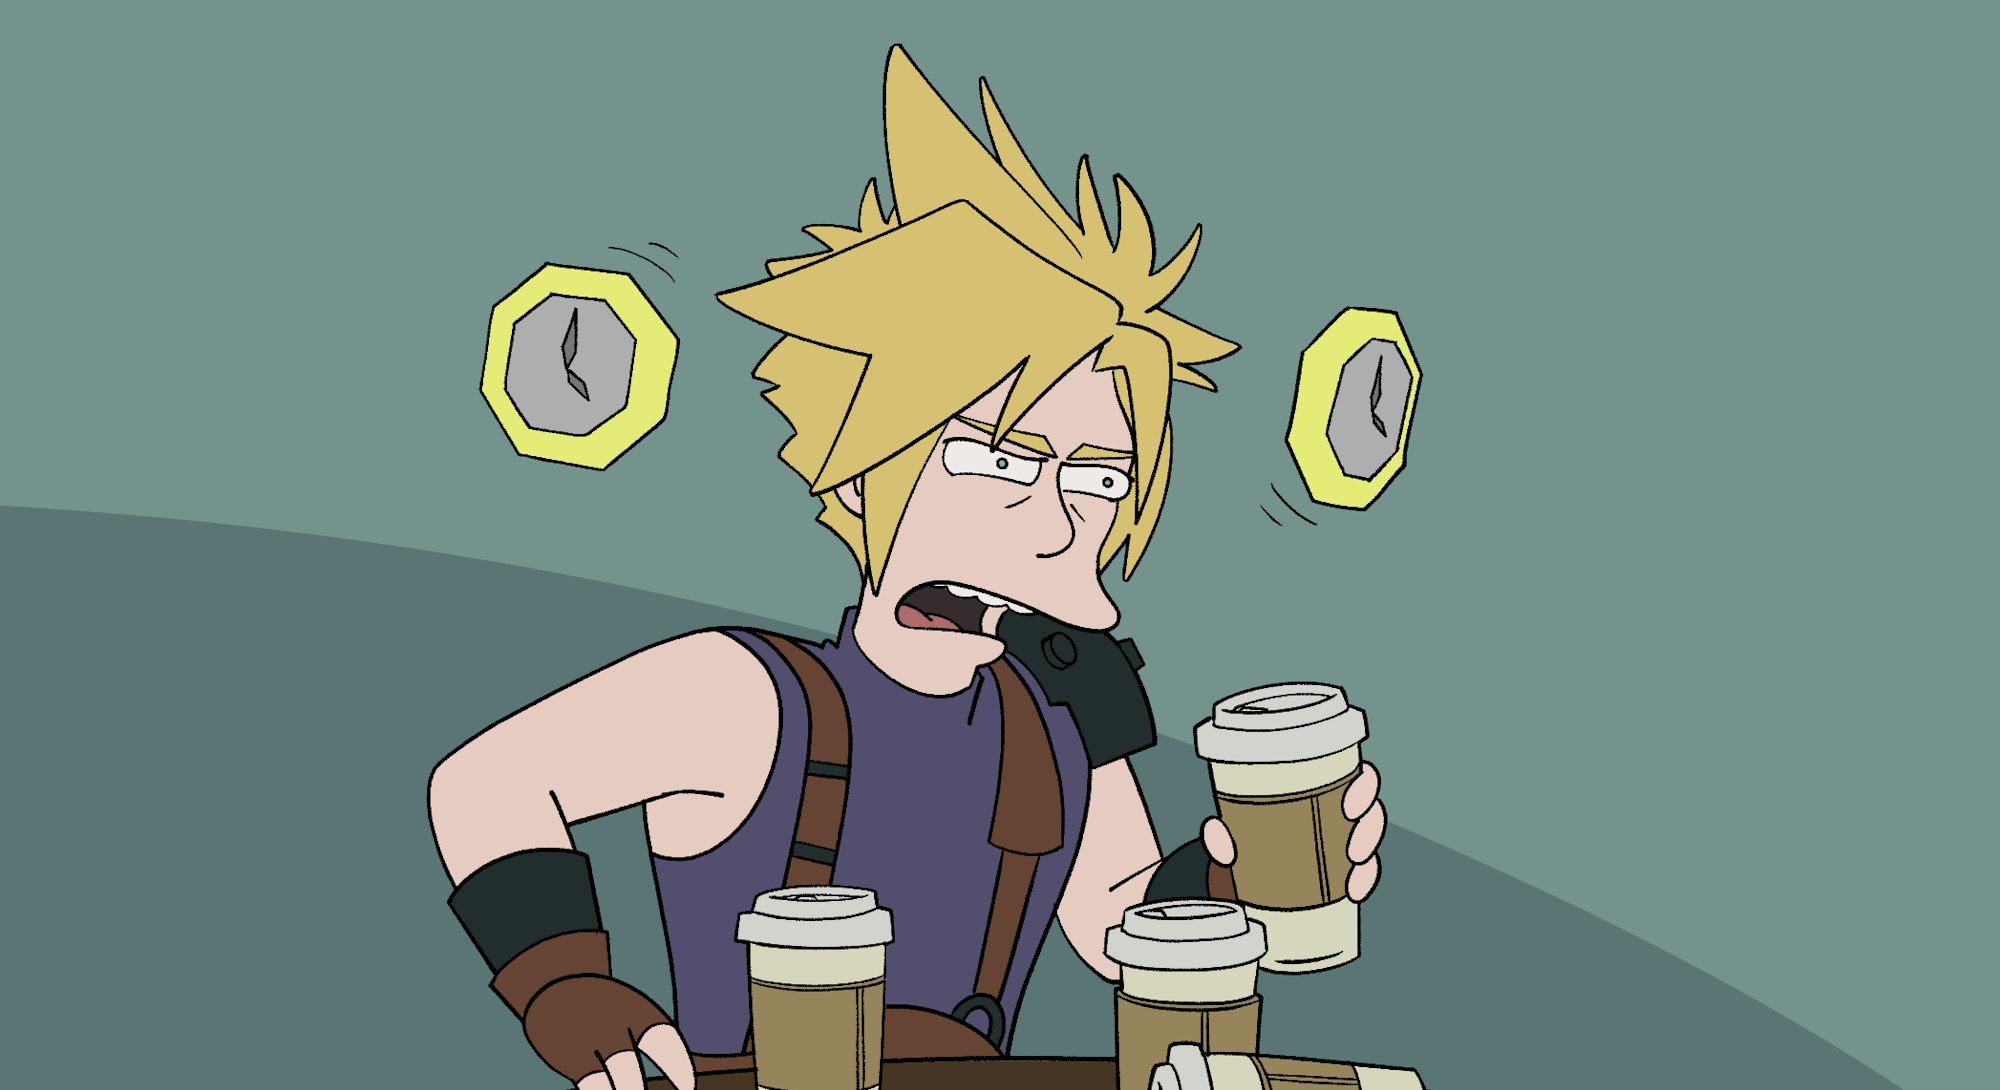 Cloud Strife as coffee-addled Fry from Futurama.